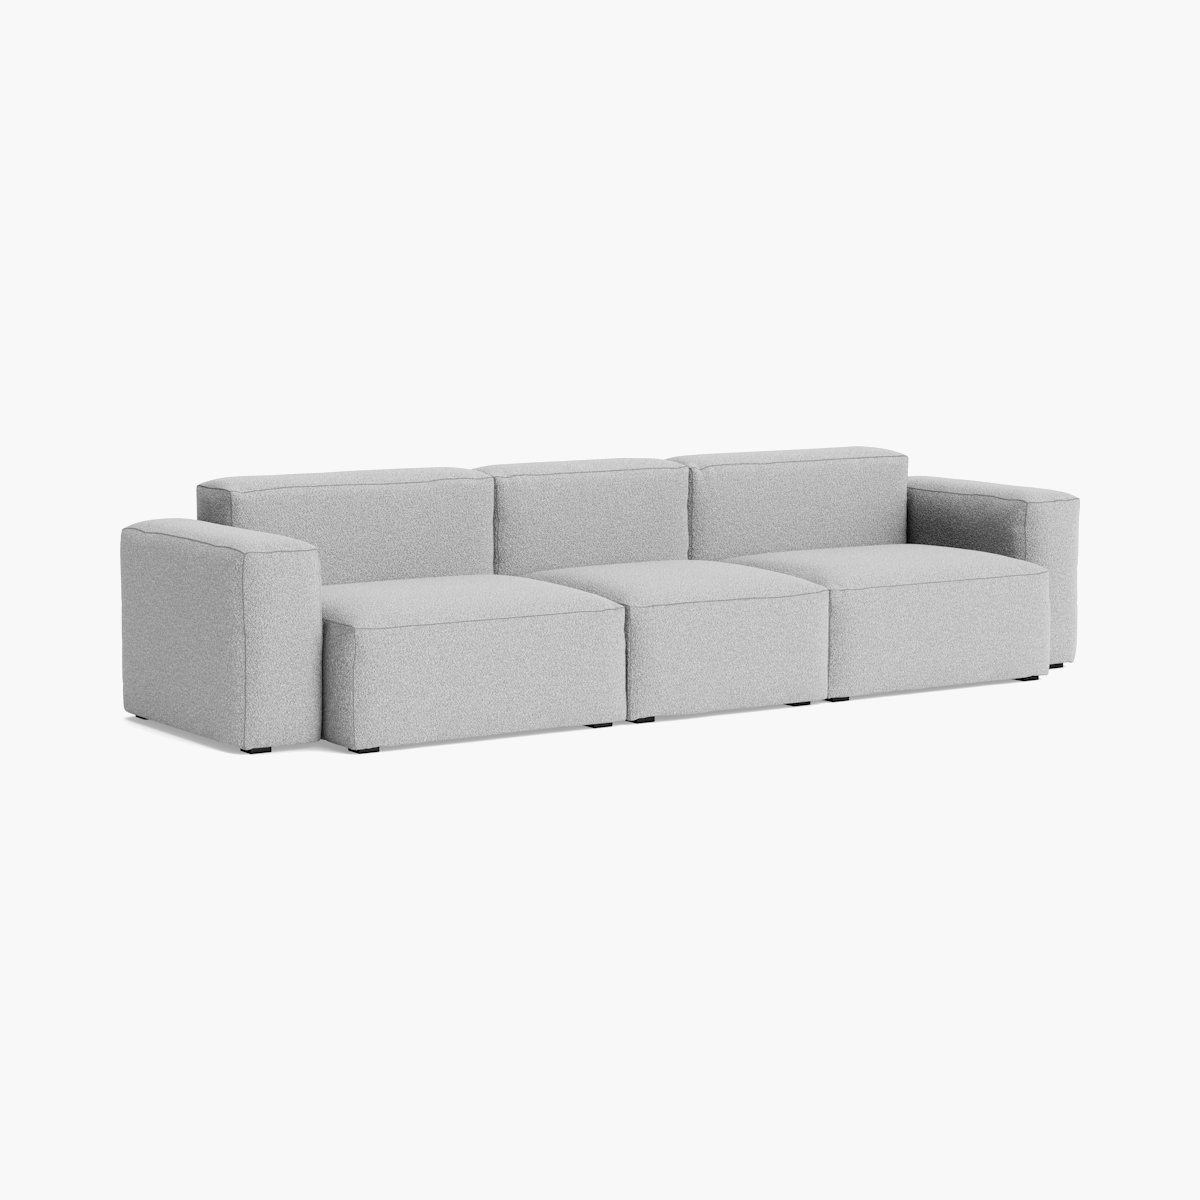 Mags Soft Low 3-Seat Sofa